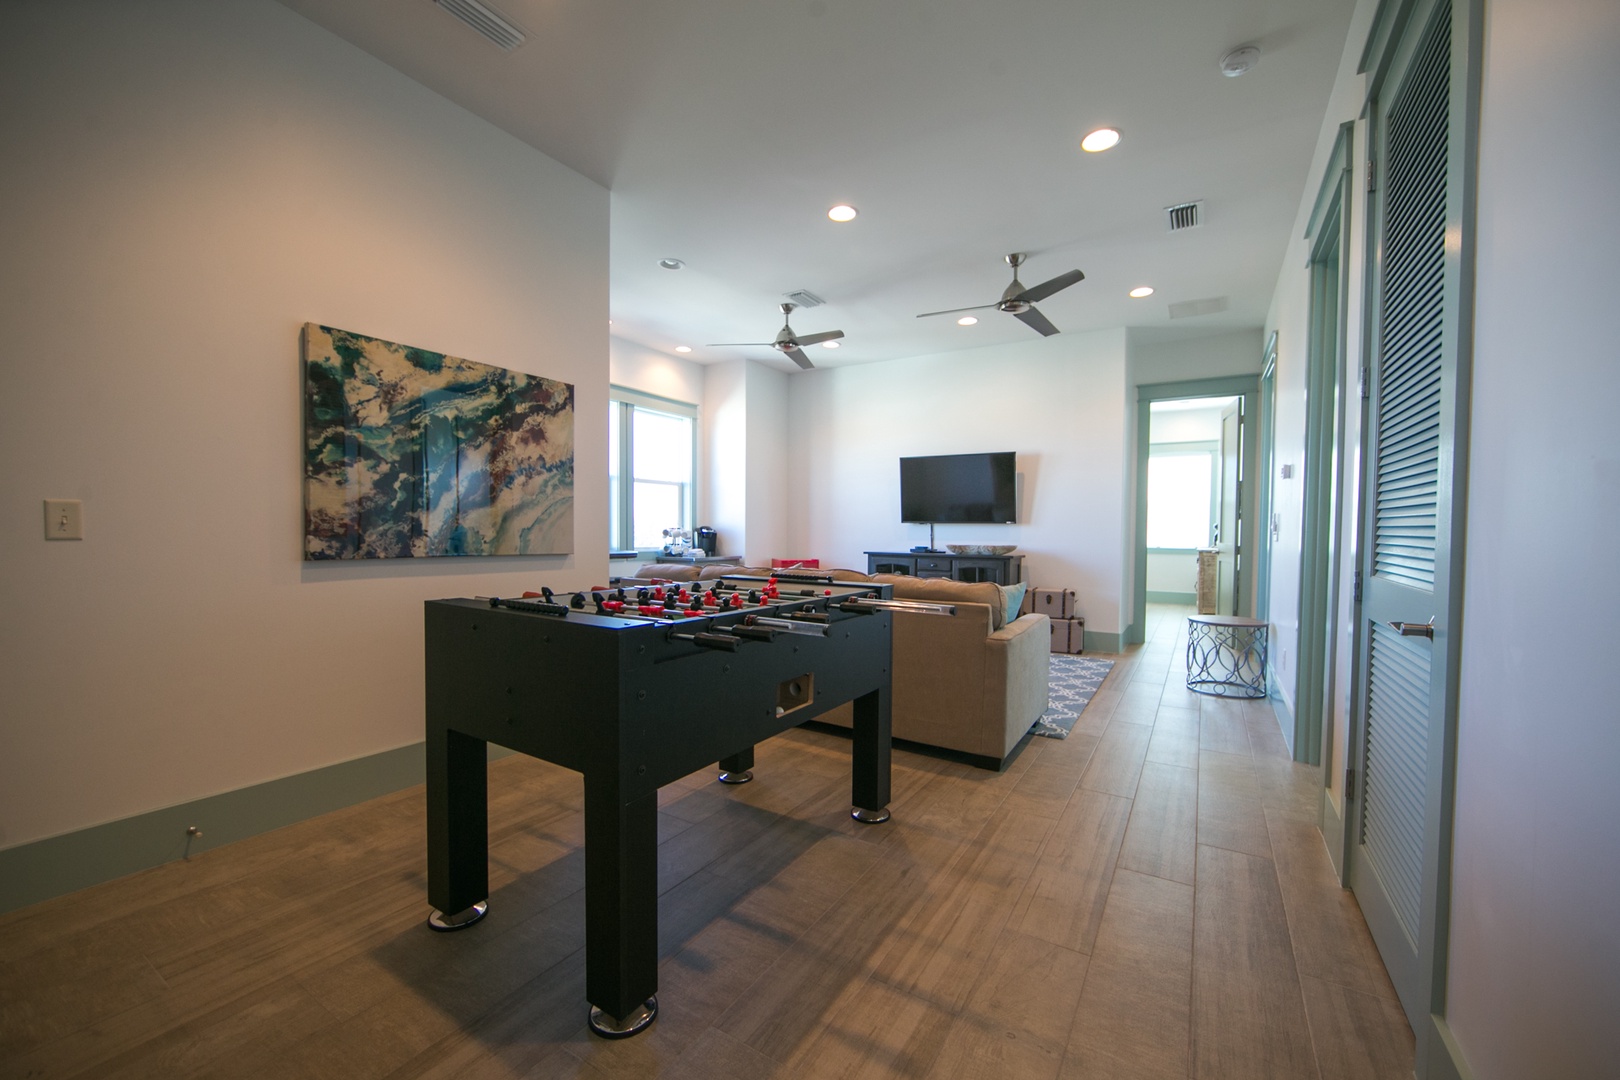 On the third floor, you'll find a family room with a flat screen TV, foosball table, and mini-fridge!